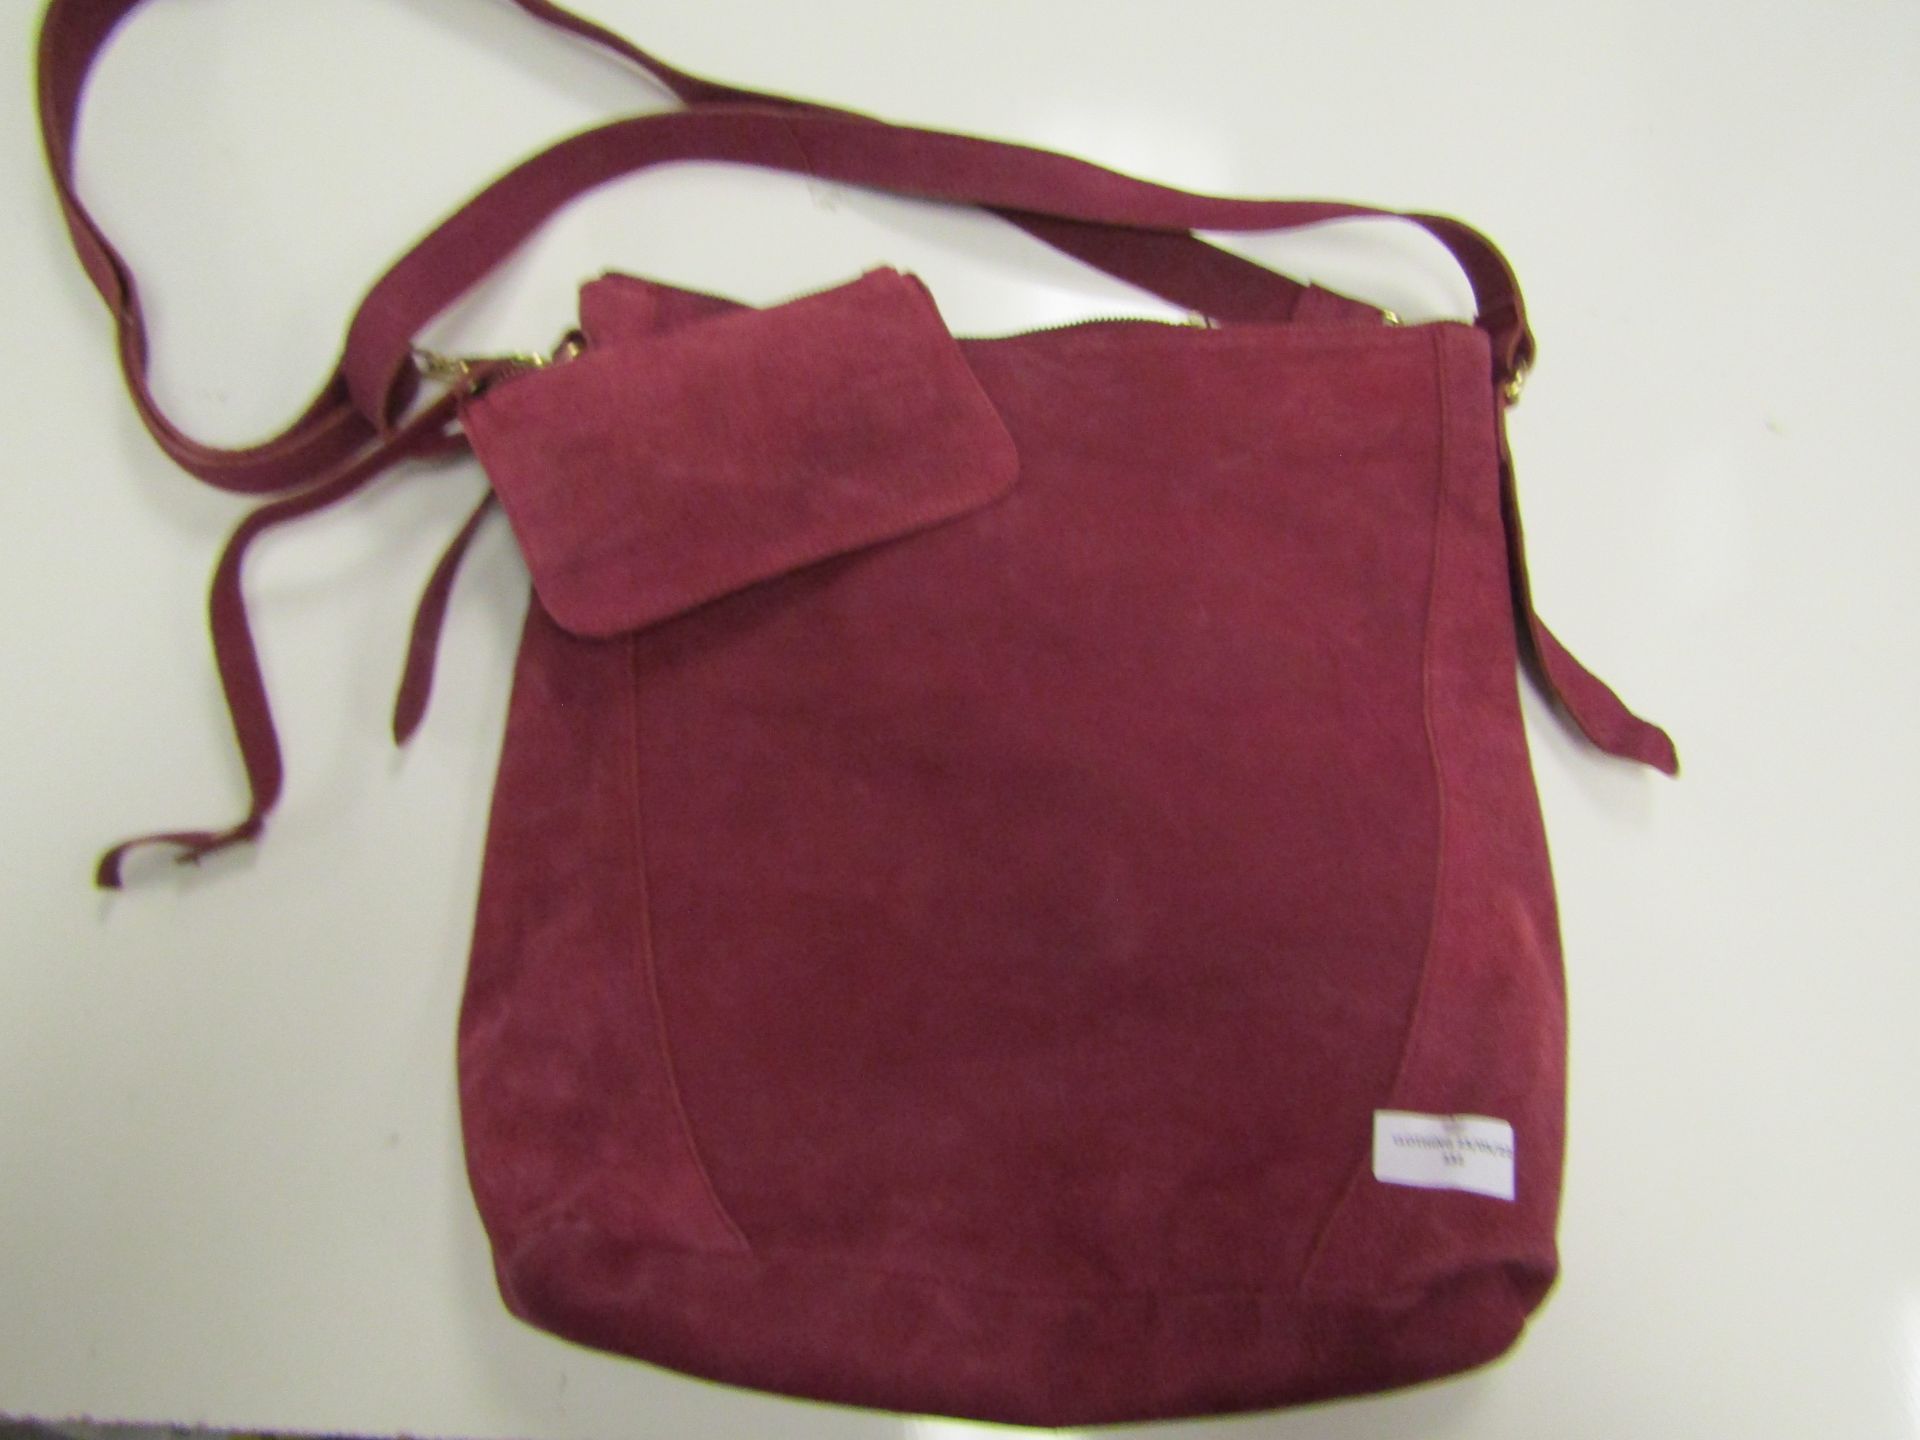 Kaleidoscope Pink Suede Bag With Matching Purse Looks Unused